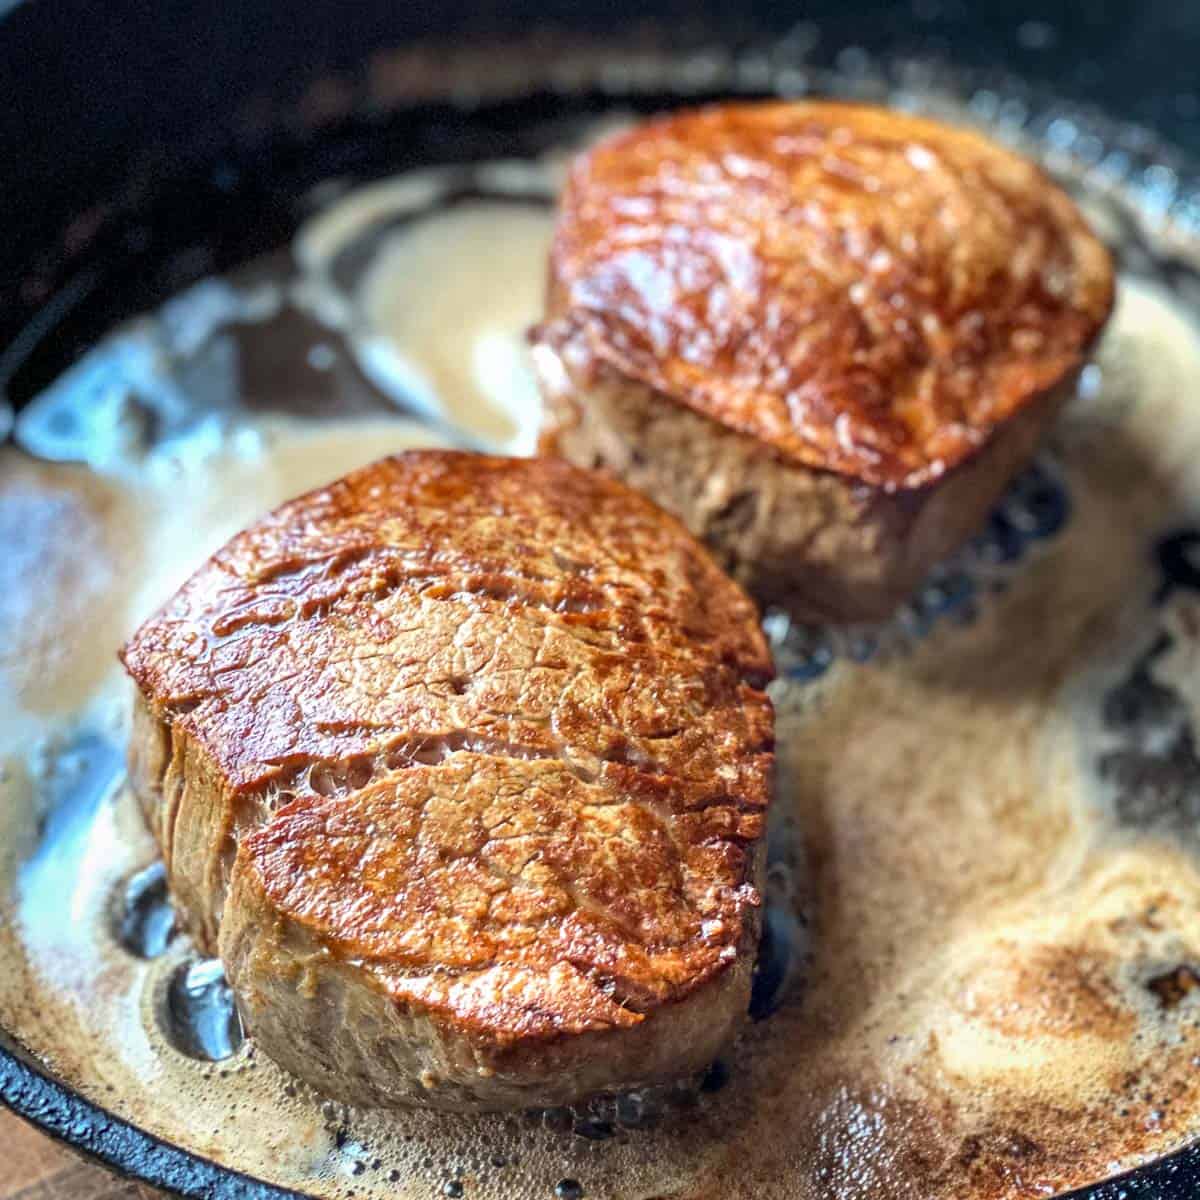 Two pan seared Filet Mignon steaks in cast iron skillet with brown butter.